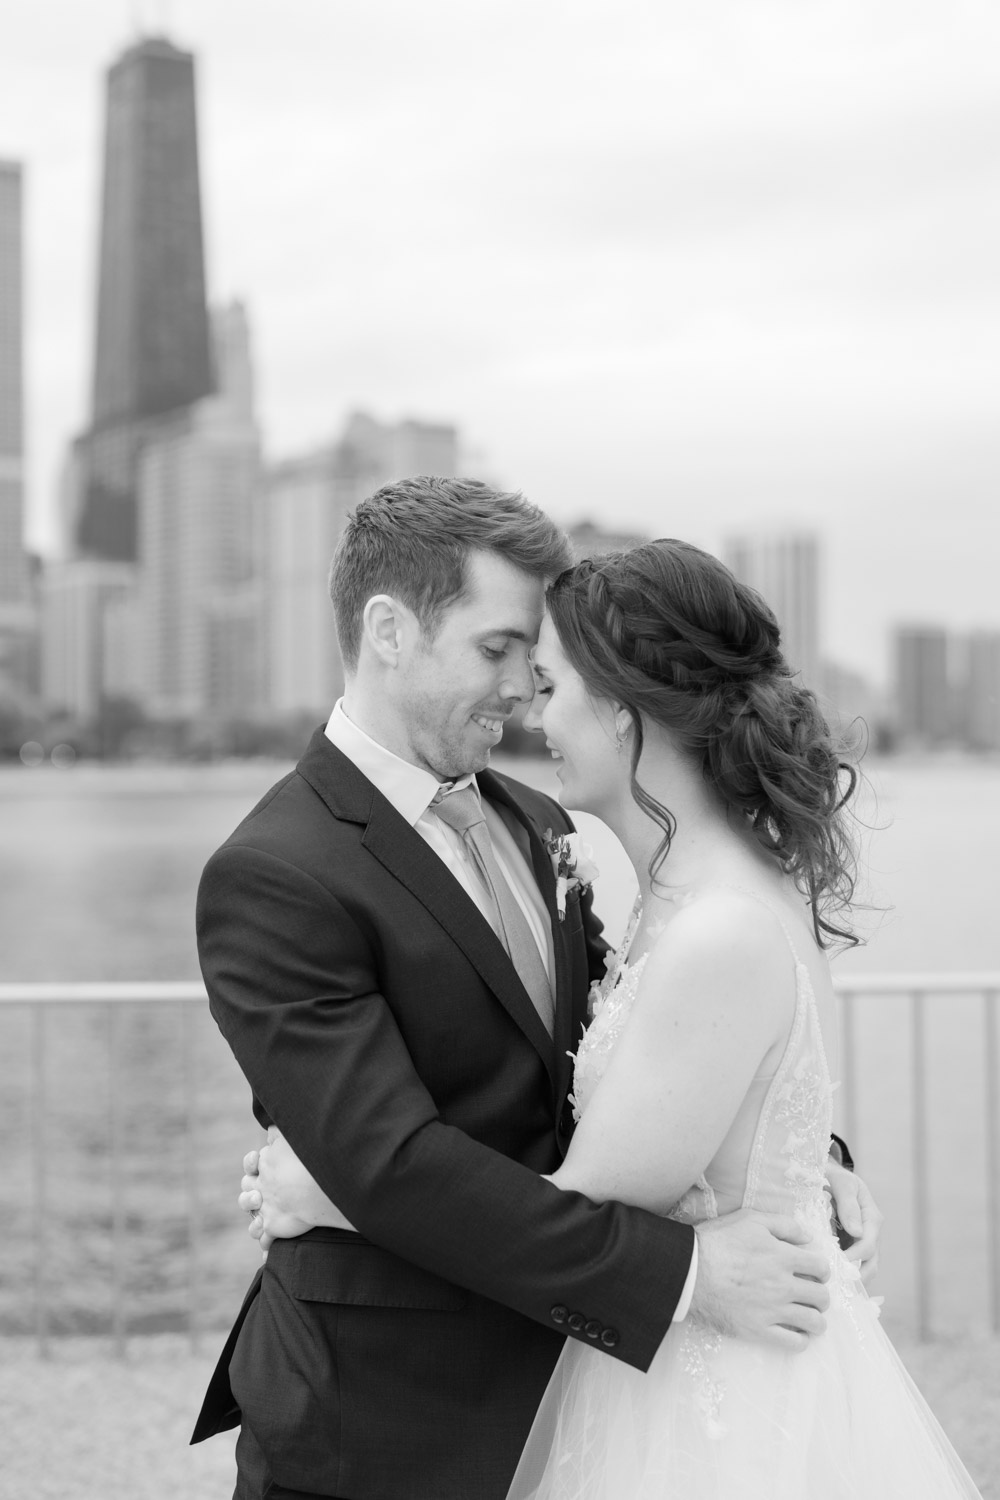 A bride and groom pose in front of the Chicago skyline at Olive Park.